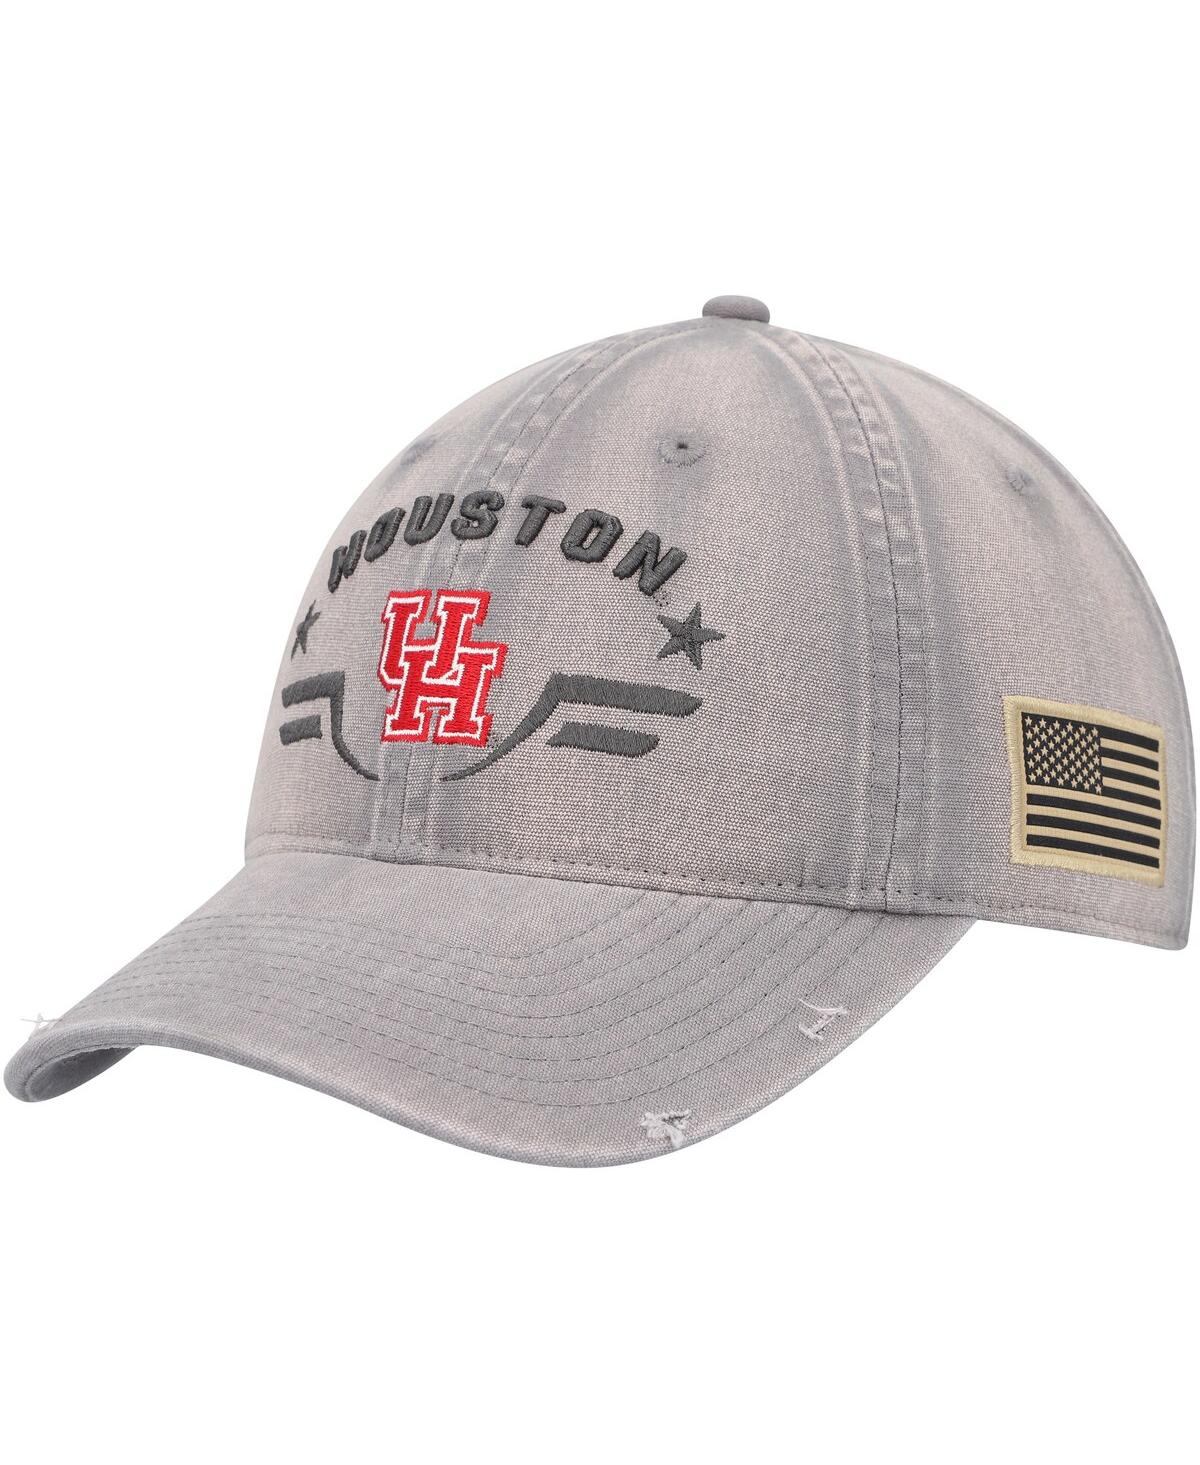 COLOSSEUM MEN'S COLOSSEUM GRAY DISTRESSED HOUSTON COUGARS OPERATION HAT TRICK TAILGATE ADJUSTABLE HAT